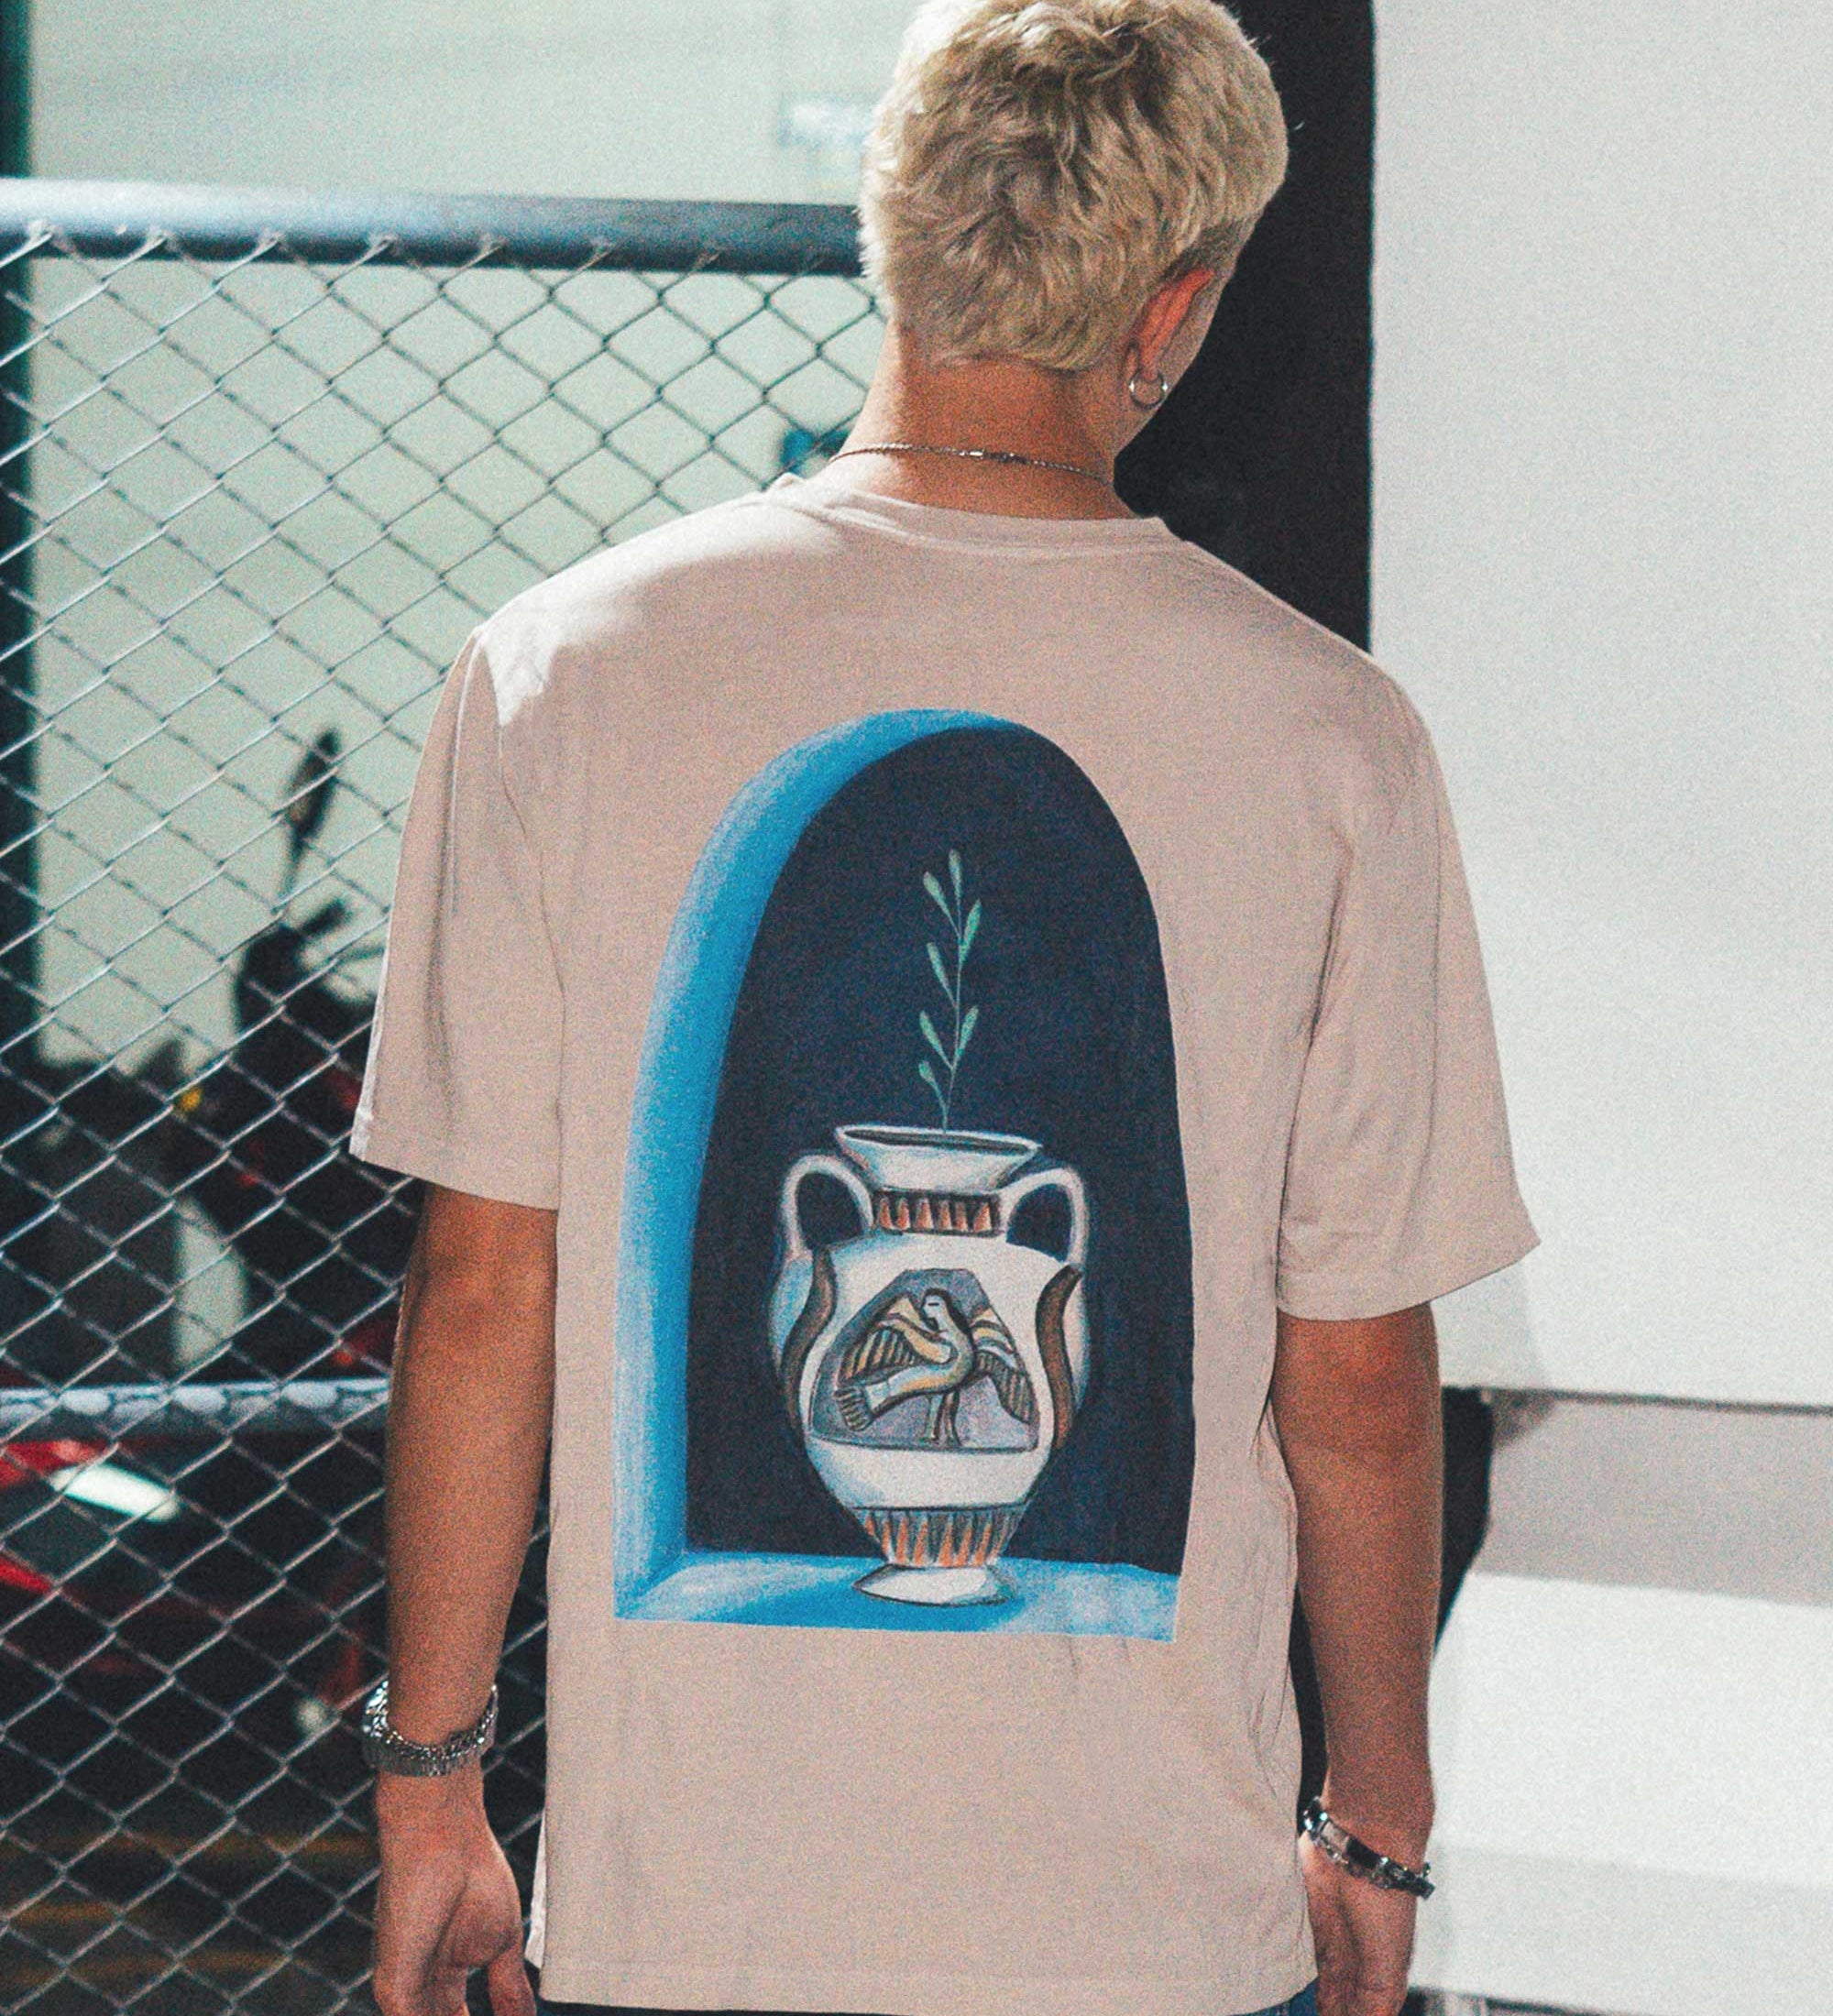 Back view of male model wearing a cream colored t-shirt with a blue vase print.